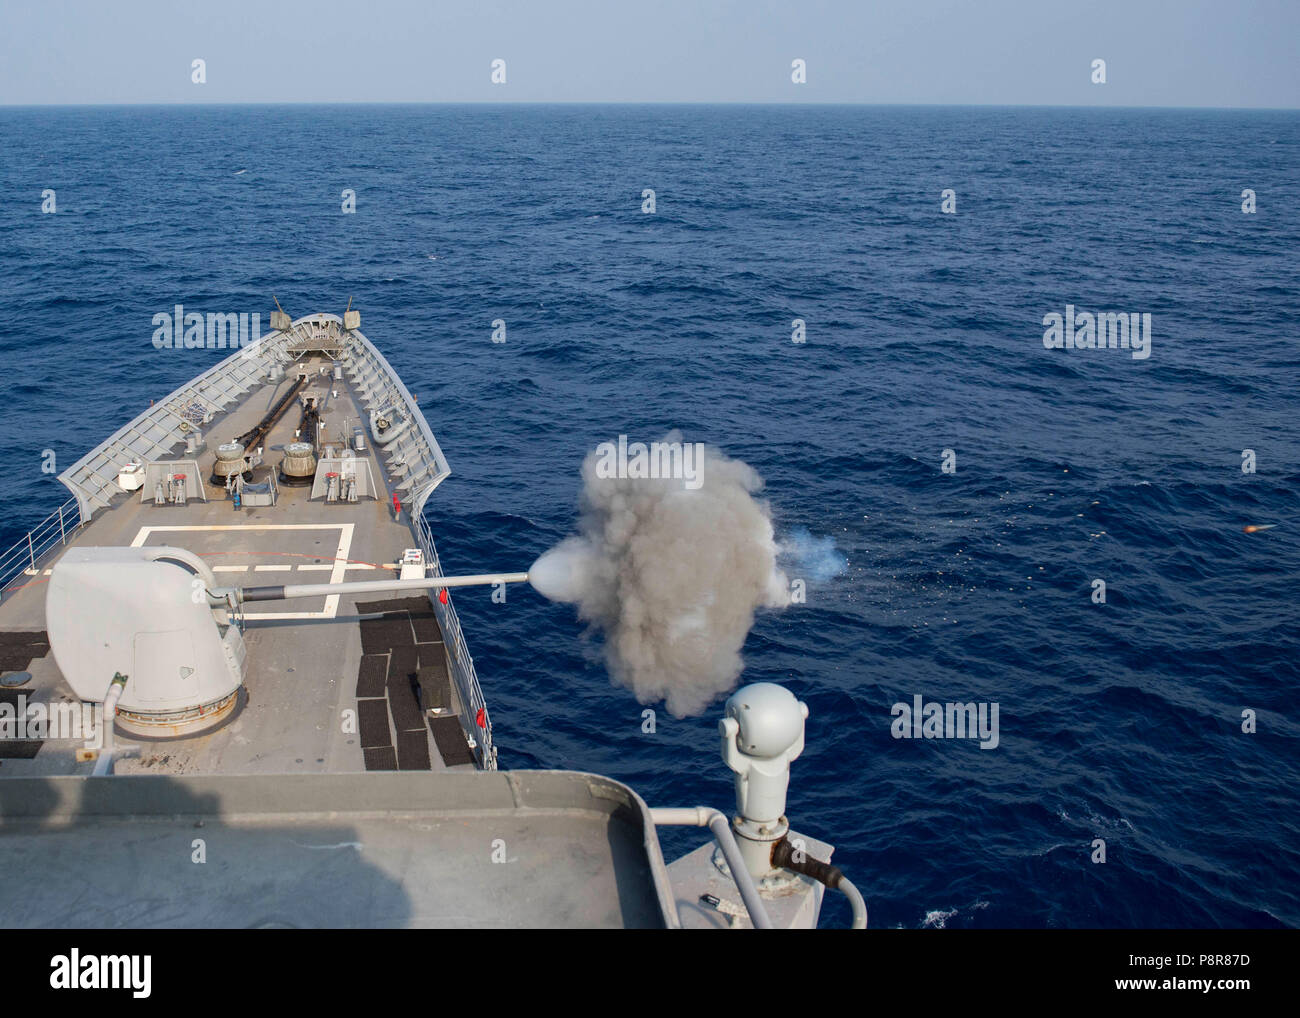 180711-N-YR245-0051 PACIFIC OCEAN (July 11, 2018) Guided-missile cruiser USS Lake Champlain (CG 57) fires its MK45 5-inch gun at a live-fire exercise with Chilean frigate CNS Almirante Lynch (FF 07) and Indian frigate INS Sahyadri (F49) during Rim of the Pacific (RIMPAC) exercise 2018. Twenty-five nations, 46 ships, five submarines, about 200 aircraft, and 25,000 personnel are participating in RIMPAC from June 27 to Aug. 2 in and around the Hawaiian Islands and Southern California. The world’s largest international maritime exercise, RIMPAC provides a unique training opportunity while fosterin Stock Photo